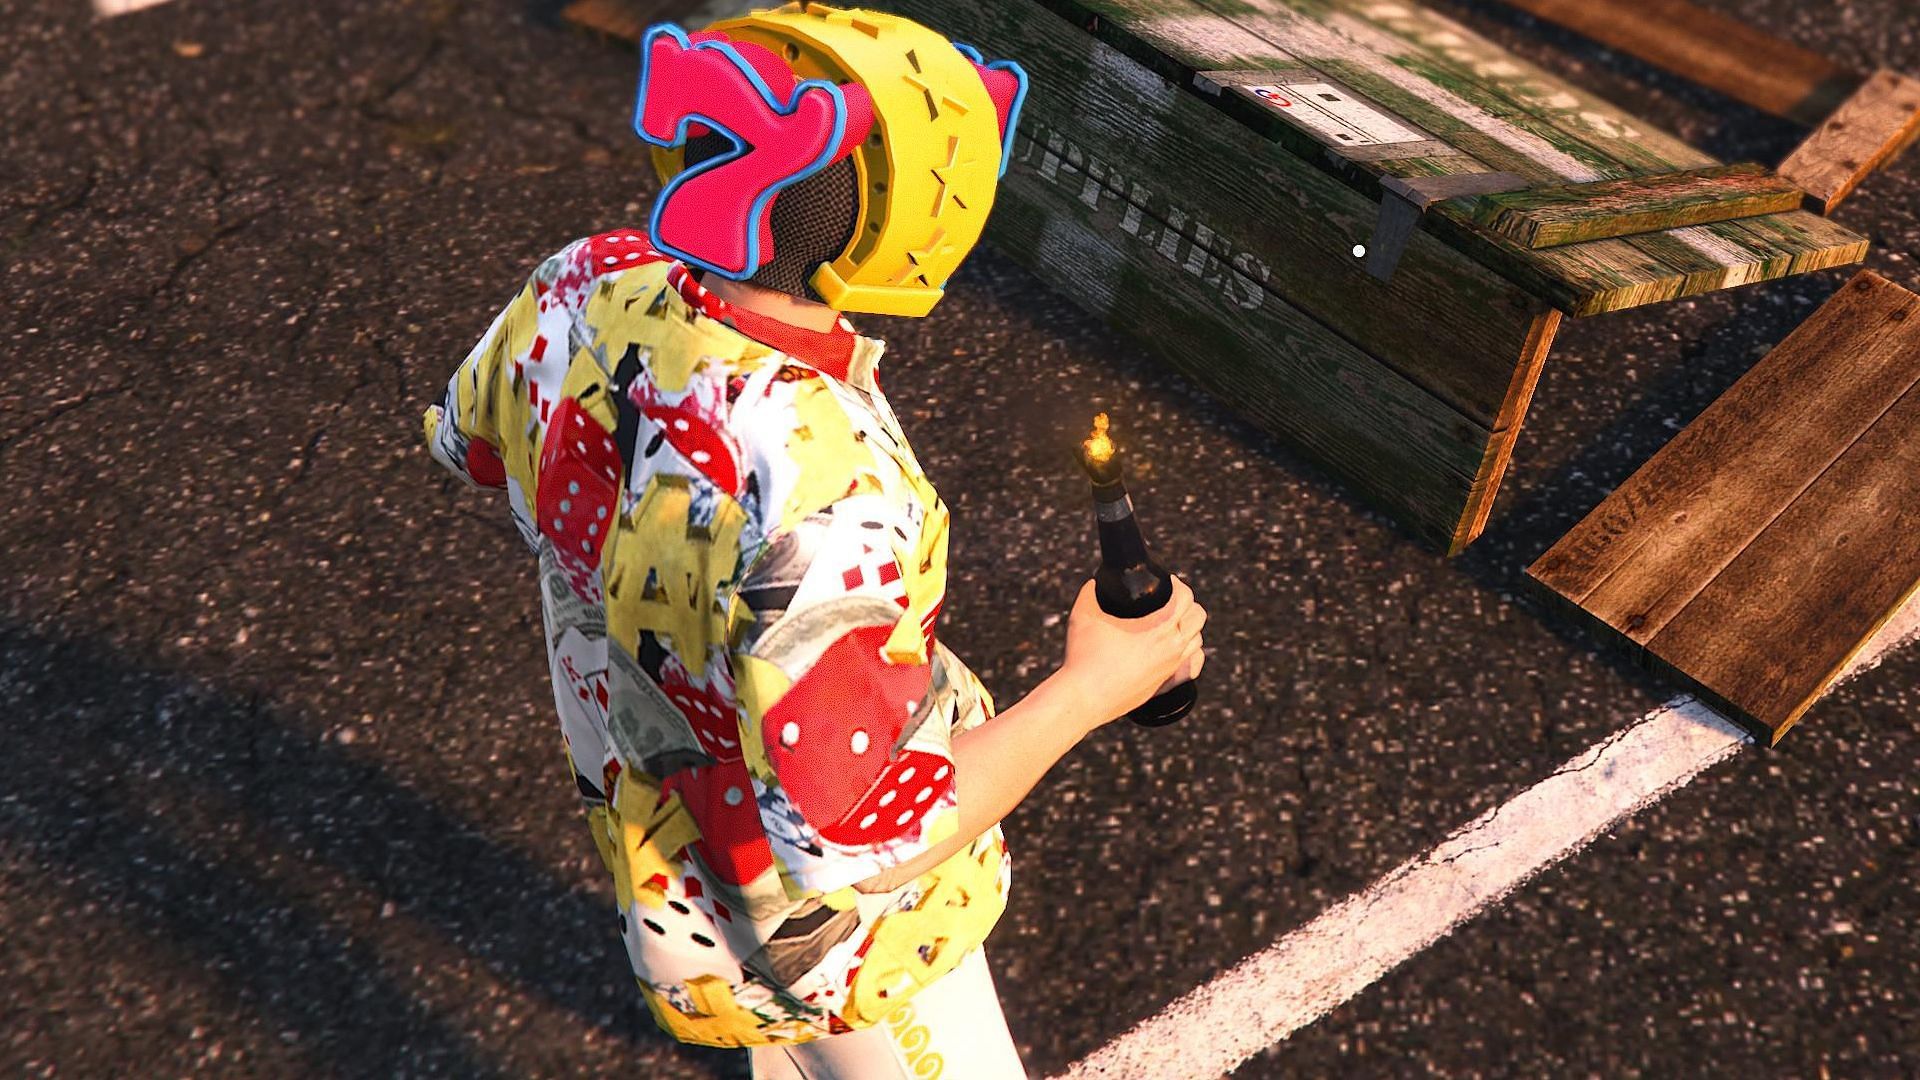 A player holding this weapon